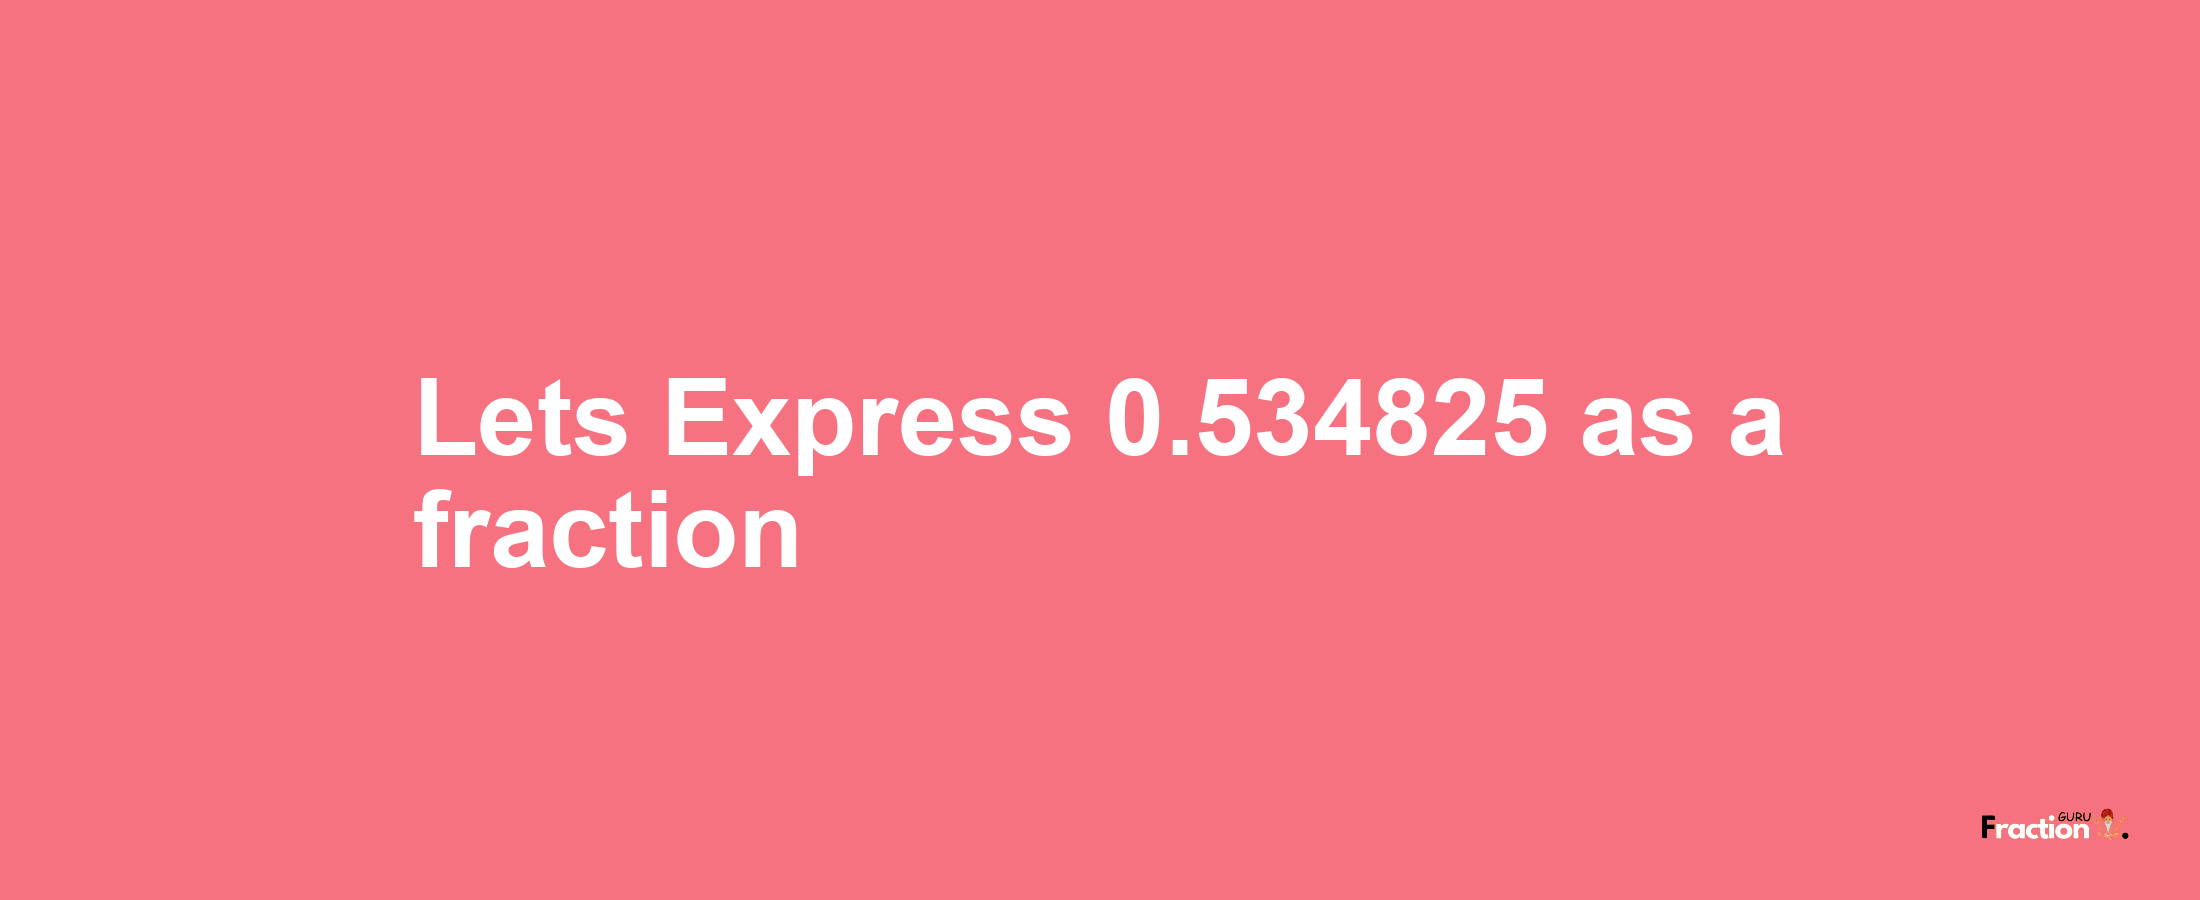 Lets Express 0.534825 as afraction